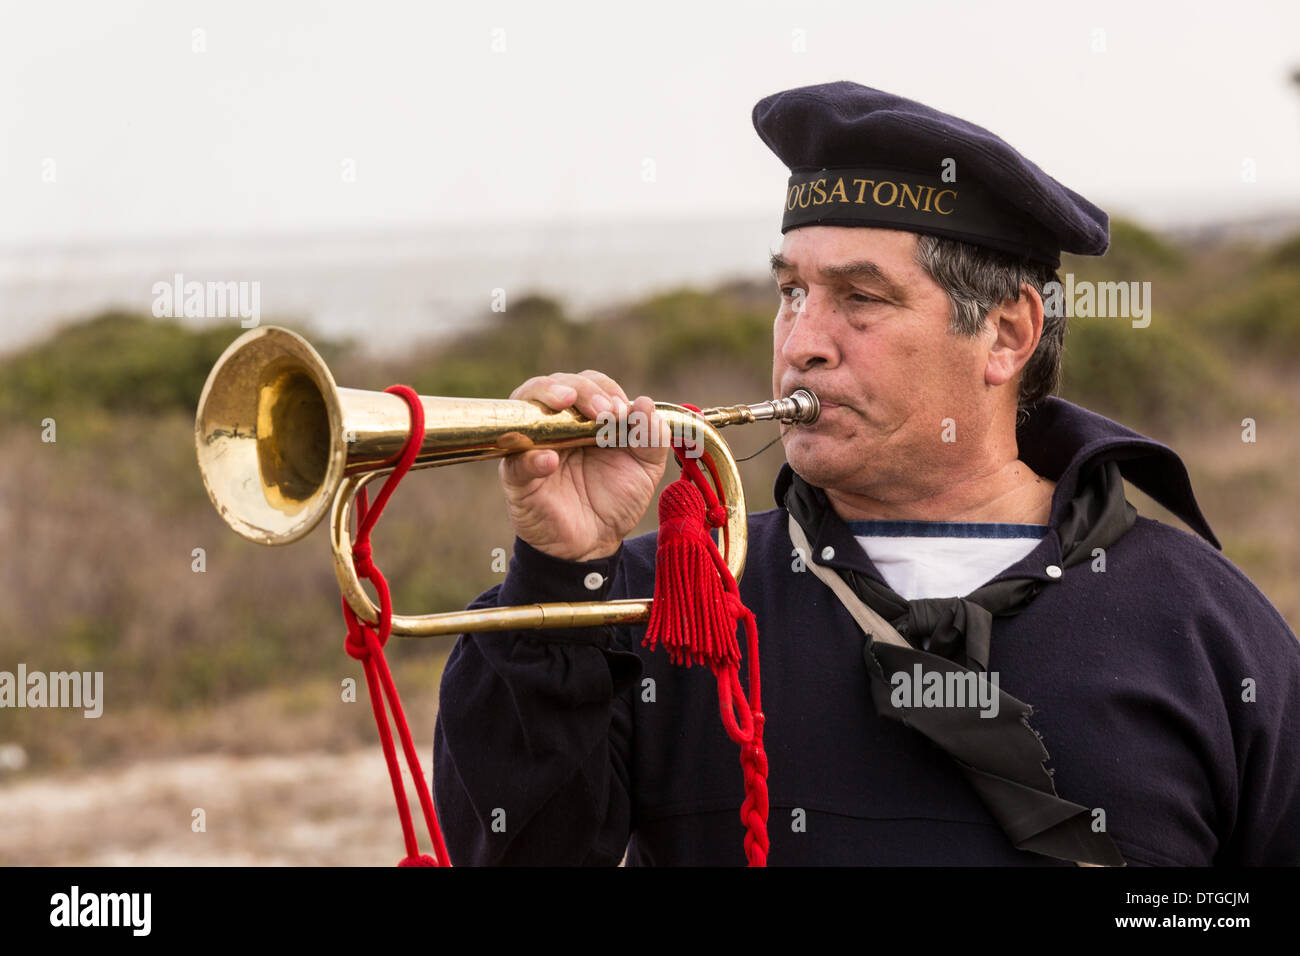 A lone bugler plays taps along Breach Inlet in honor of the sailors of the Union navy ship the USS Housatonic sunk by the Confederate submarine H.L. Hunley 150-year-ago during the Civil War February 17, 2014 on Sullivan's Island, SC. The Hunley was the first submarine to sink a ship in battle and then suffered an accident killing the crew. Stock Photo